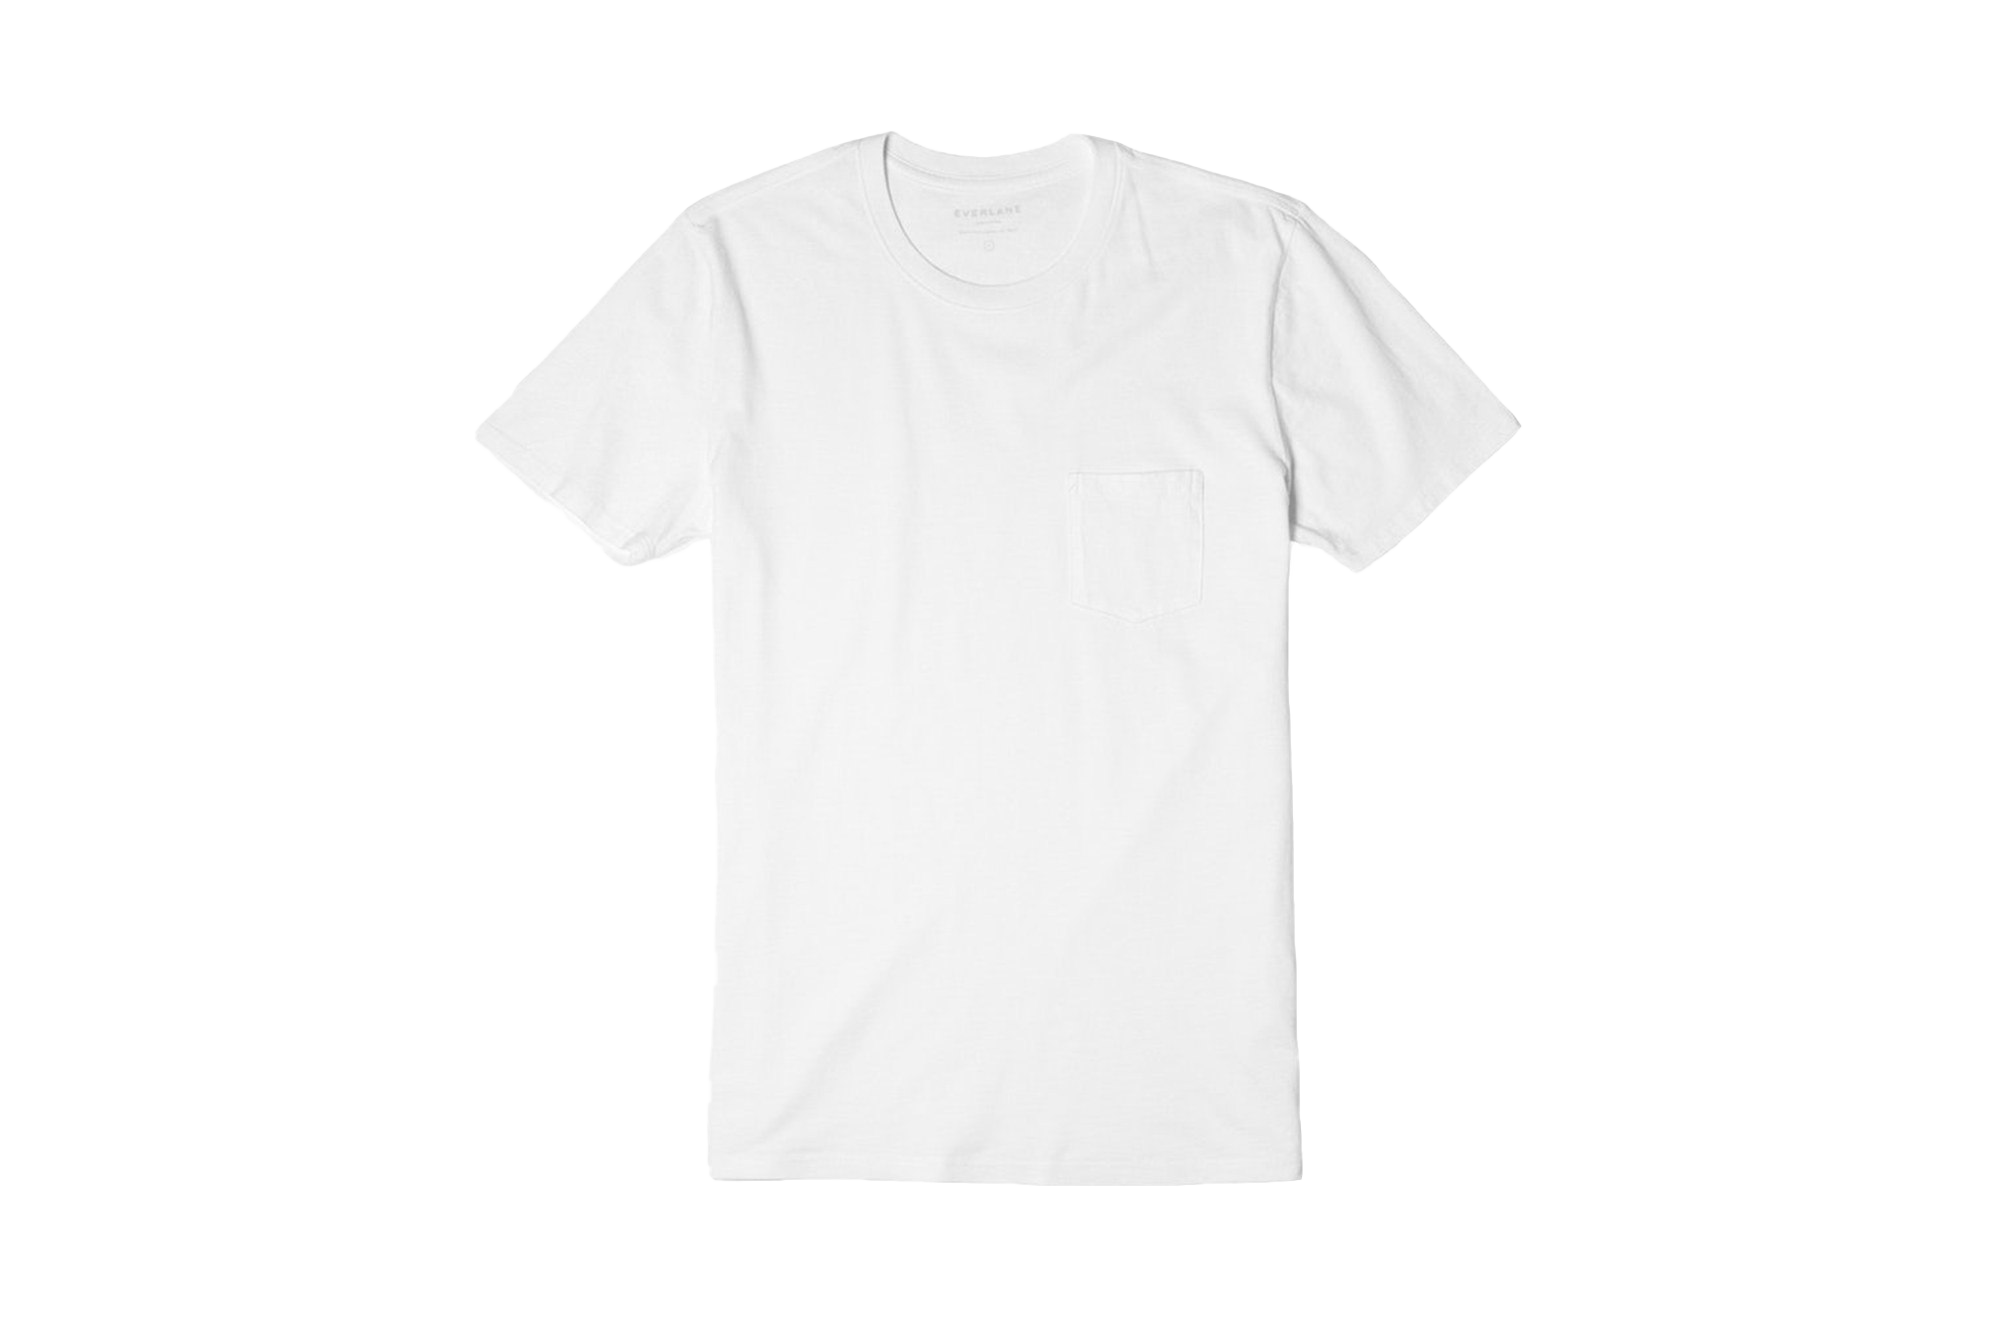 Plain White T Shirt Front And Back Png Ghana Tips - vrogue.co